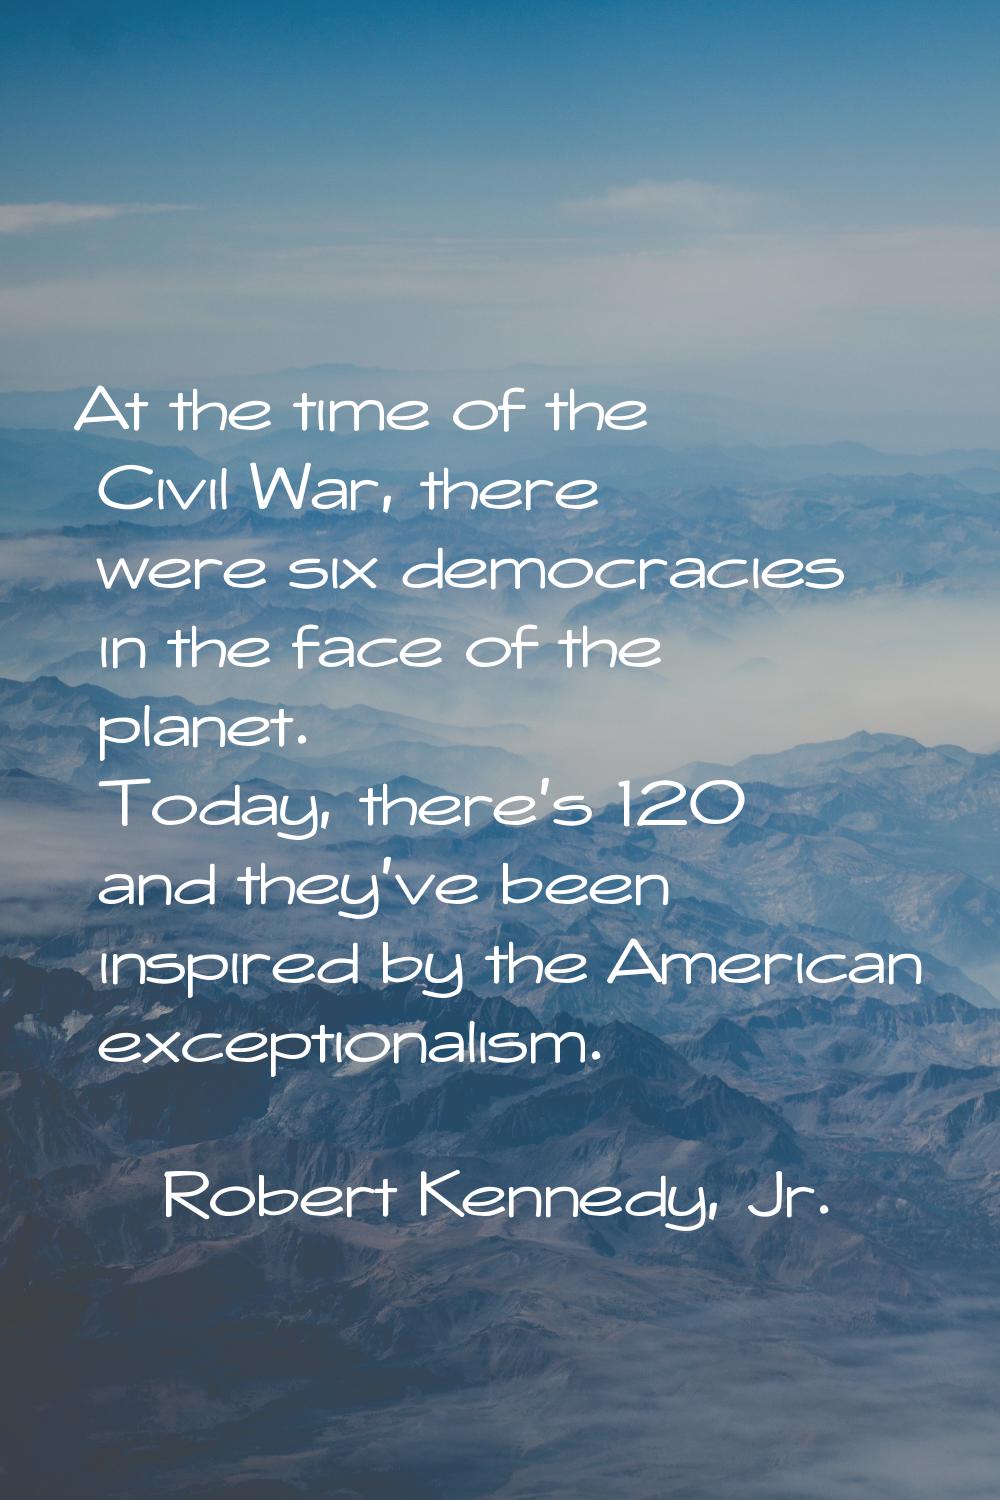 At the time of the Civil War, there were six democracies in the face of the planet. Today, there's 